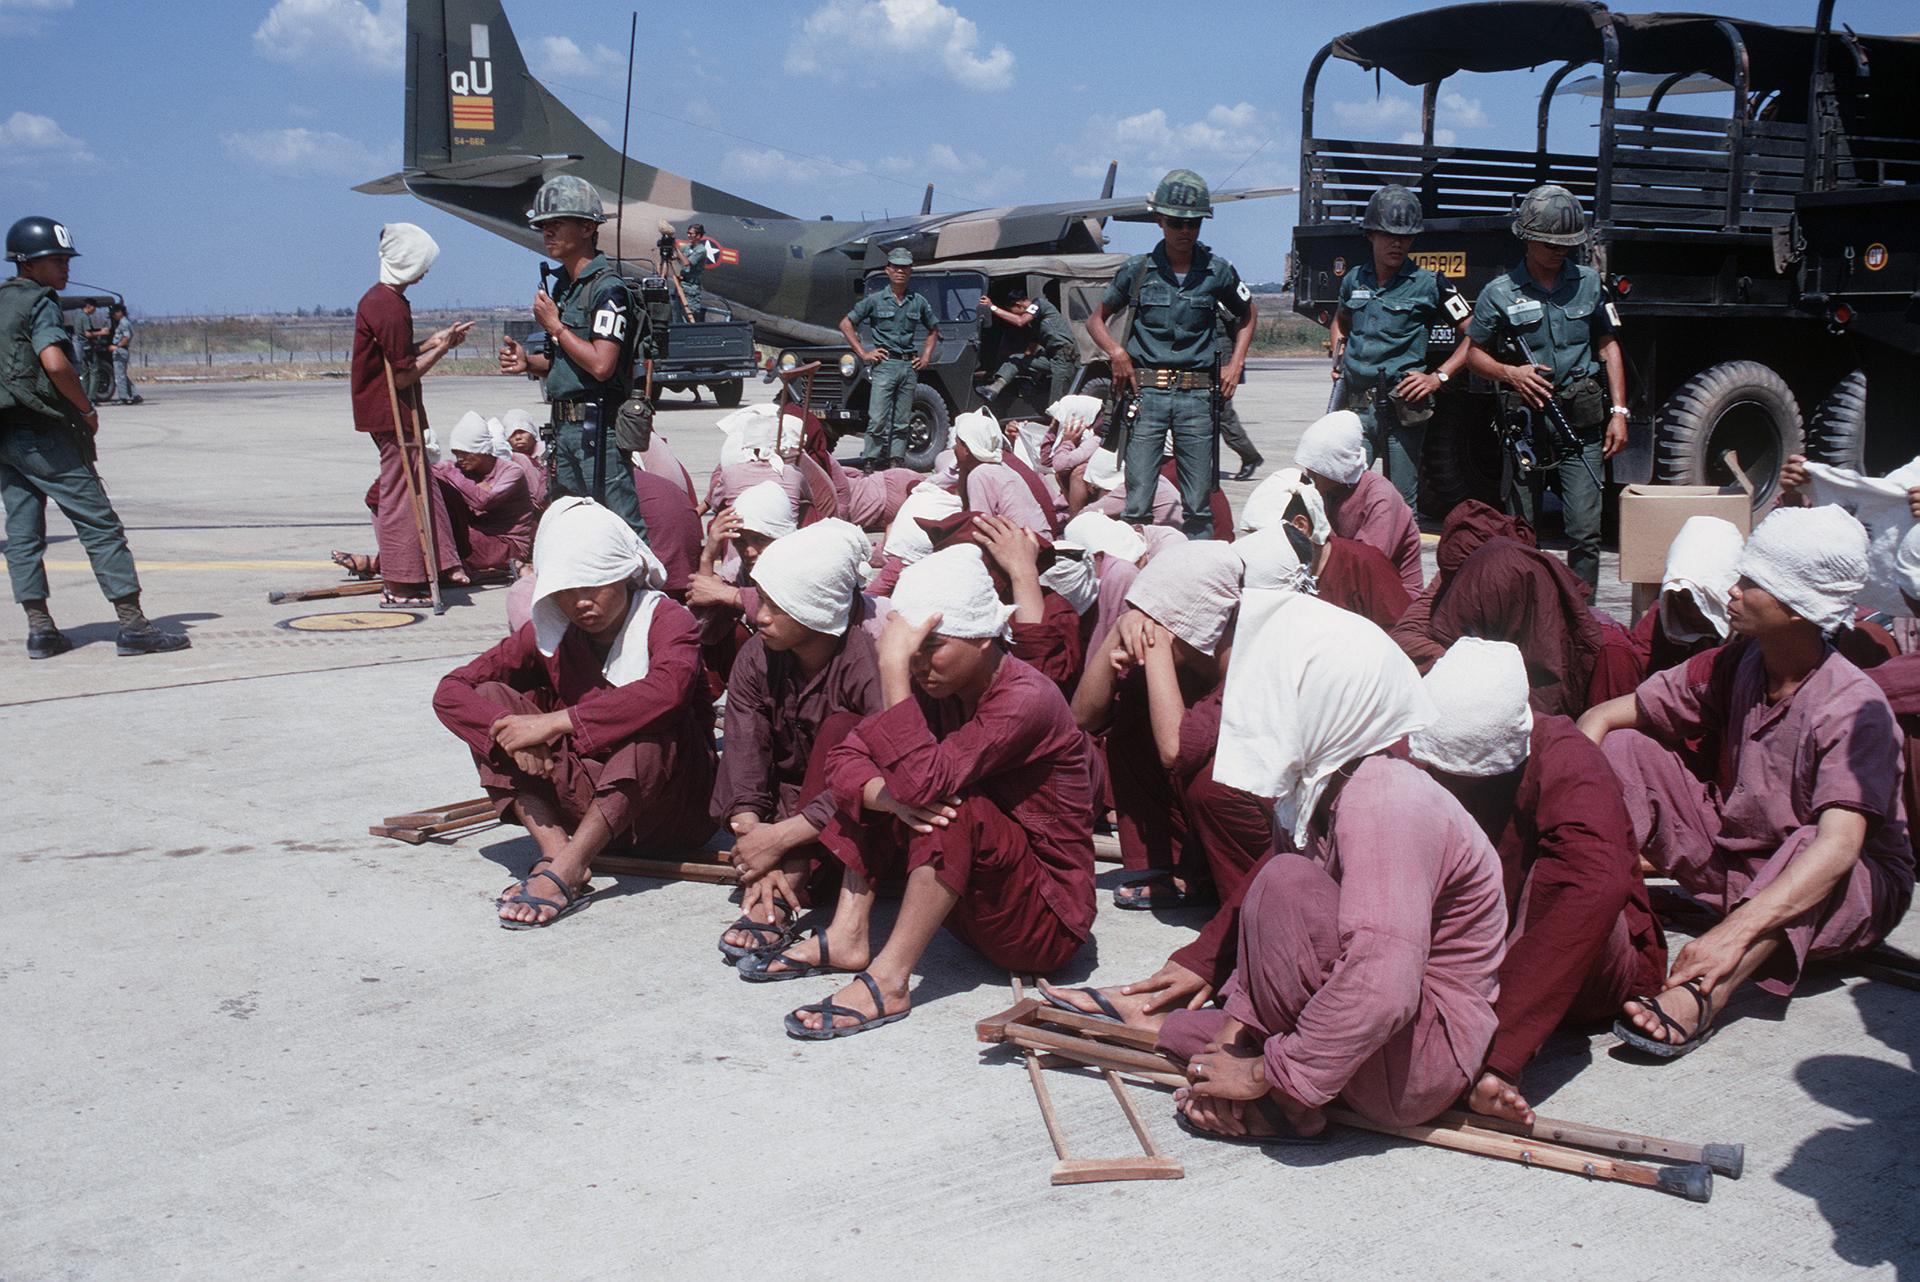 Viet Cong prisoners sit on a tarmac in Vietnam in 1973, under watch by South Vietnamese military police.